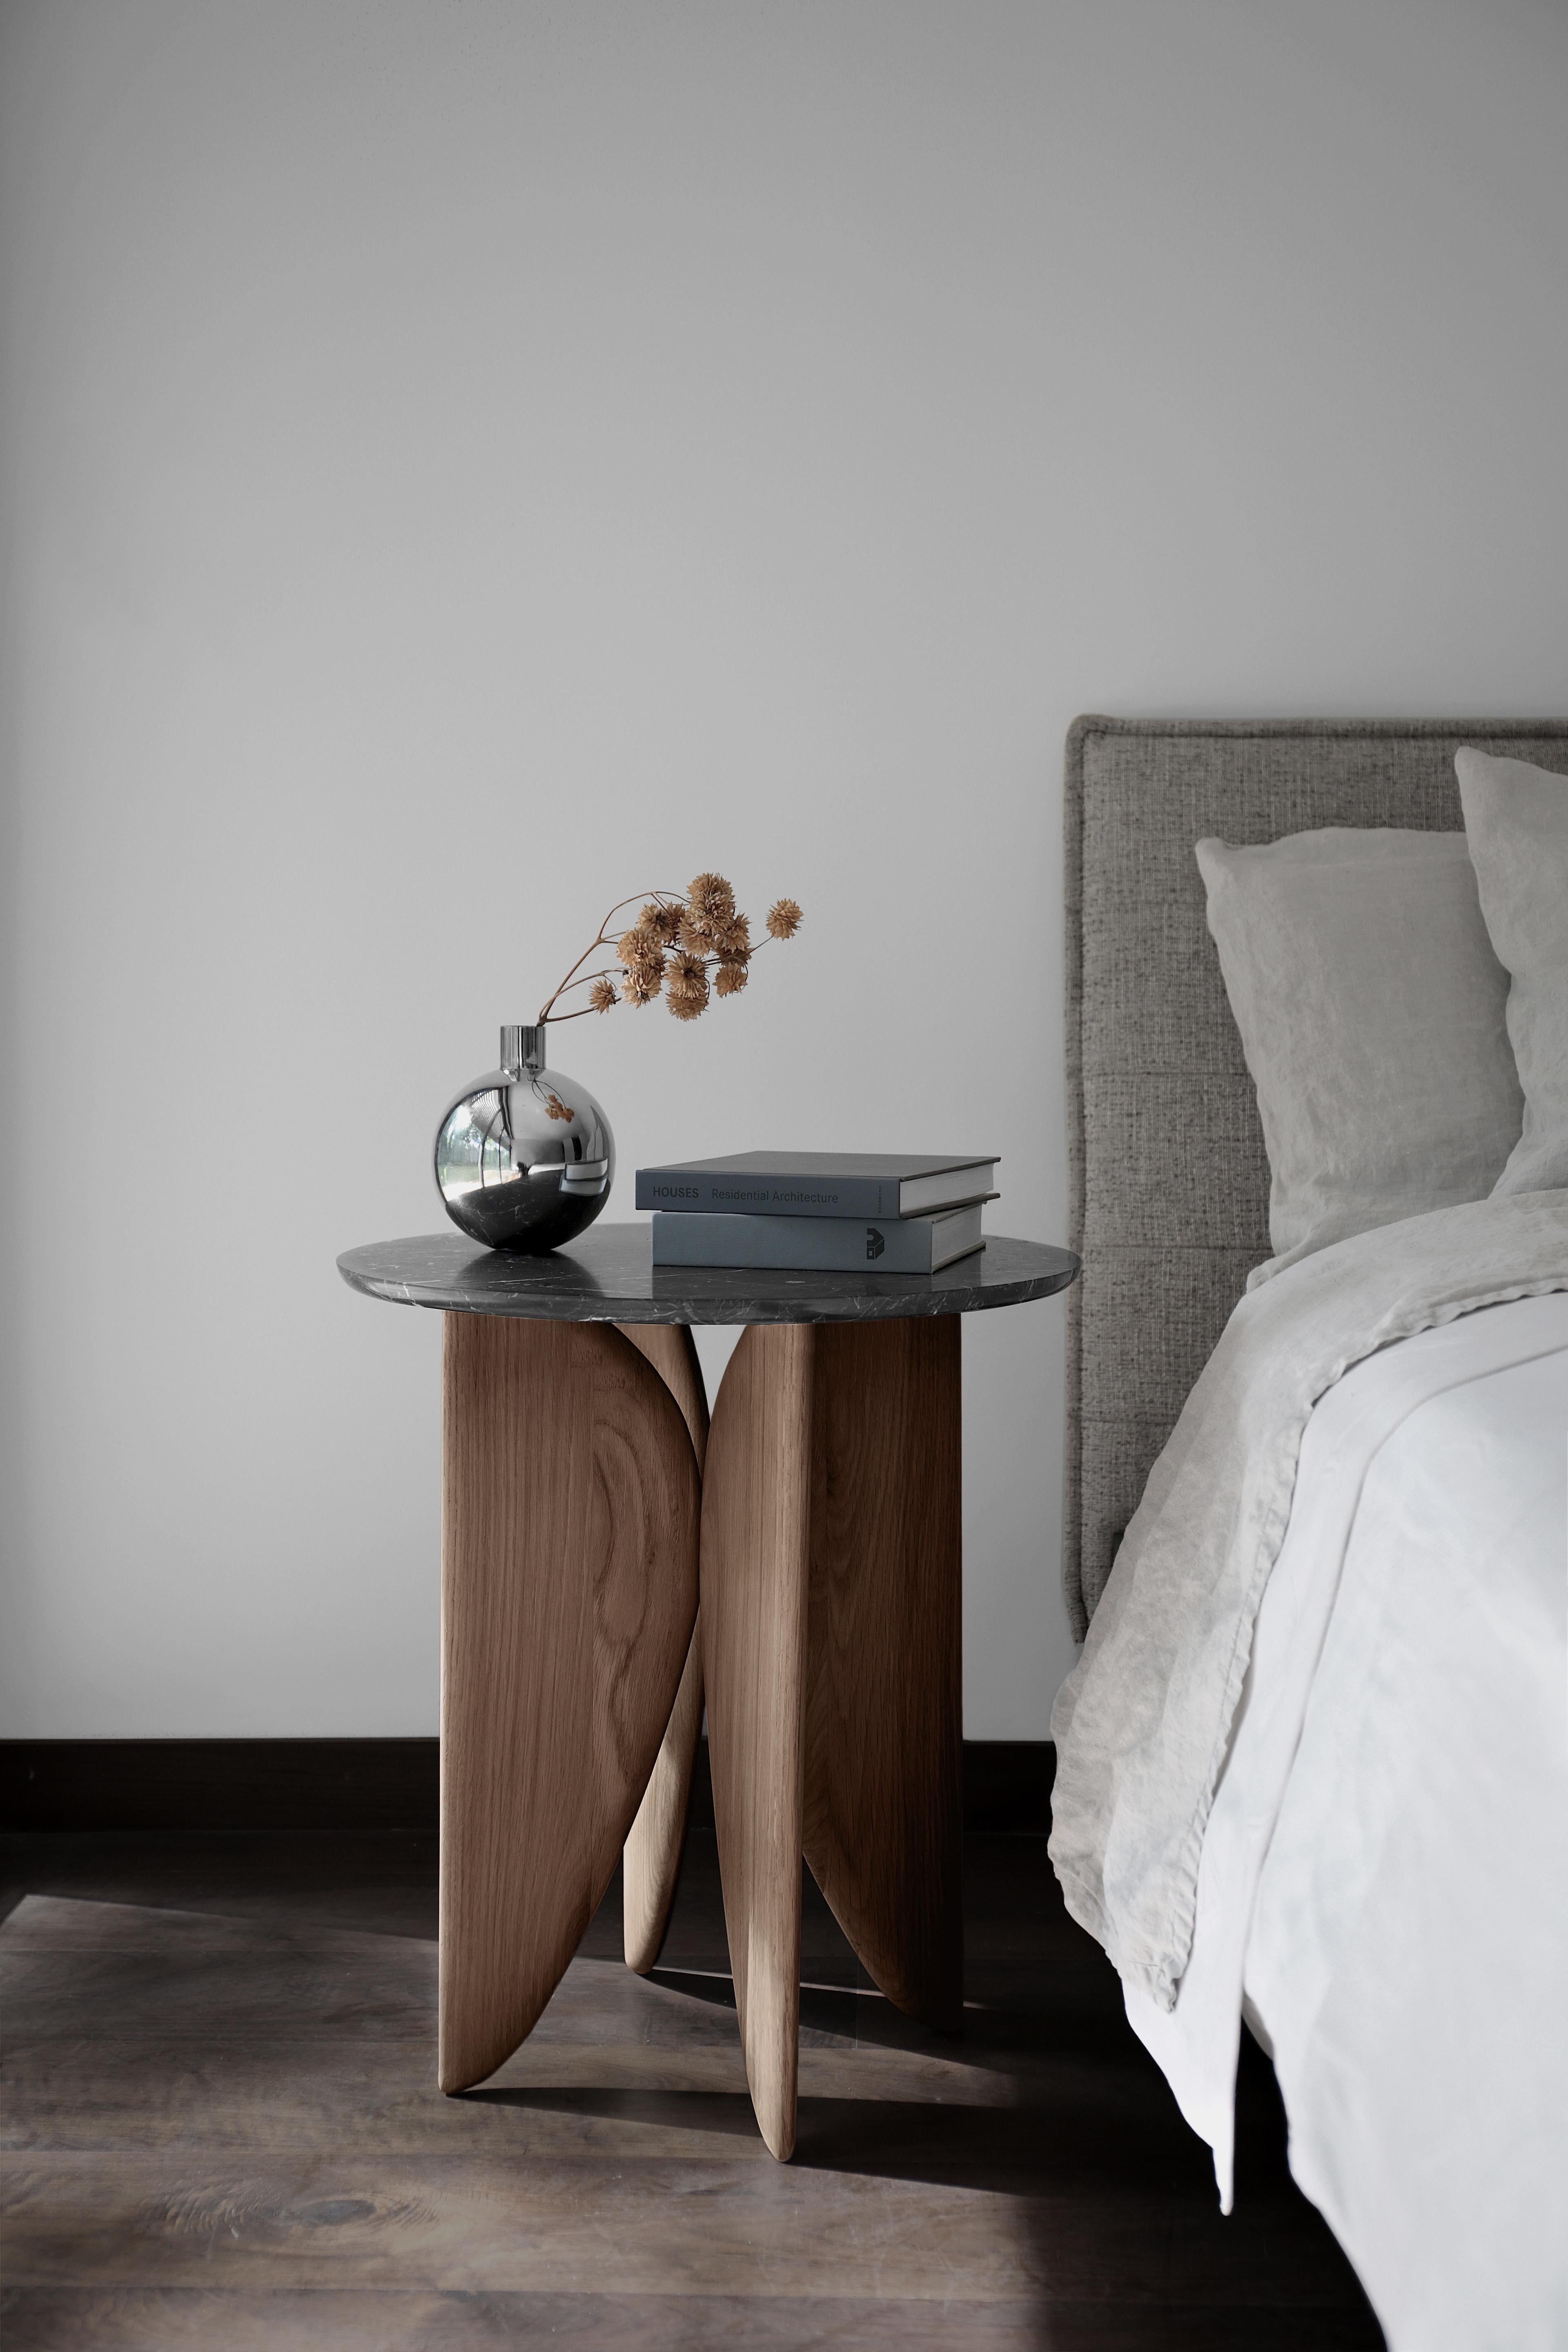 Noviembre VI Side Table, Night Stand in Oak Wood and Marble Top by Joel Escalona

The Noviembre collection is inspired by the creative values of Constantin Brancusi, a Romanian sculptor considered one of the most influential artists of the